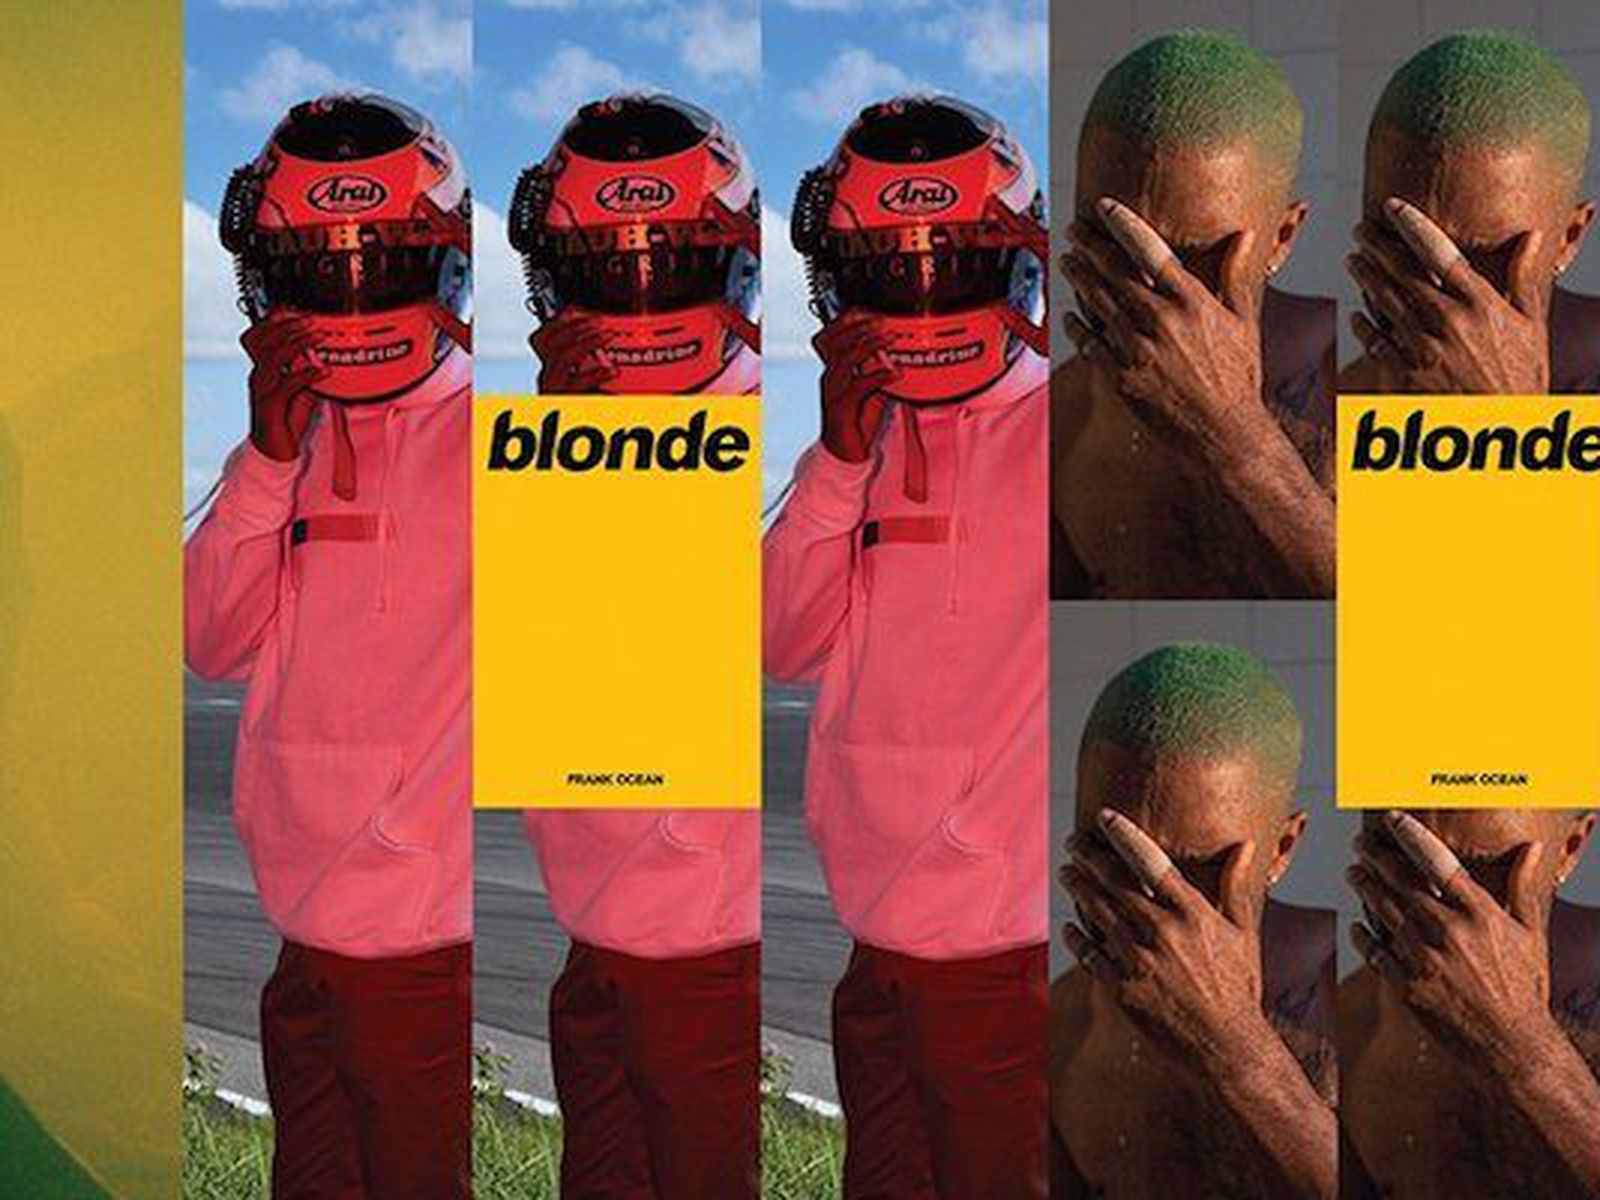 Frank Ocean's 'Blonde' Album Now Available Exclusively on Apple Music -  MacRumors